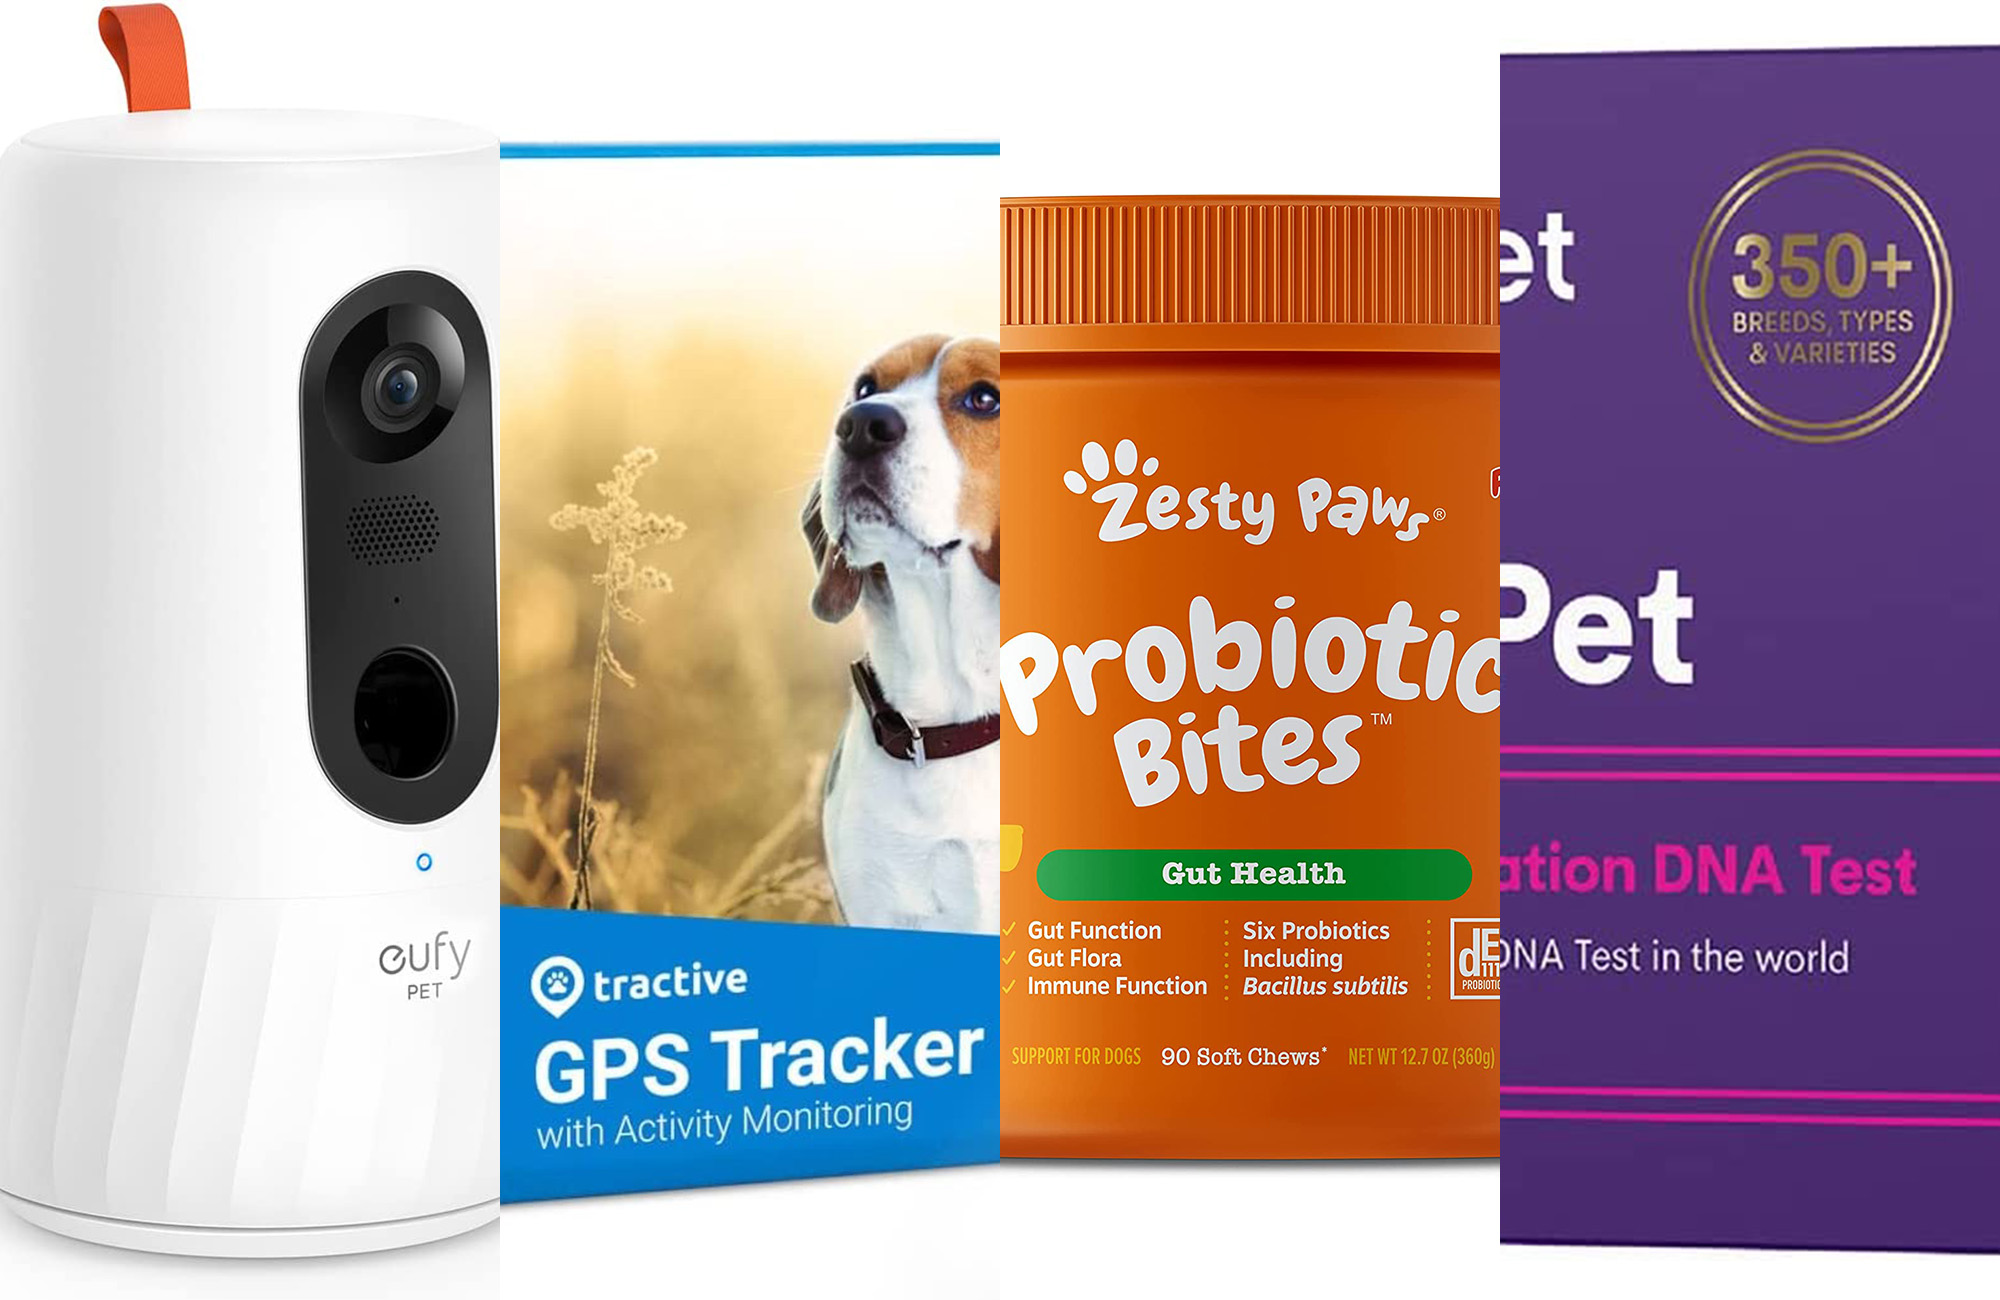 Early Cyber Monday deal: Save up to 40 percent on dog care products